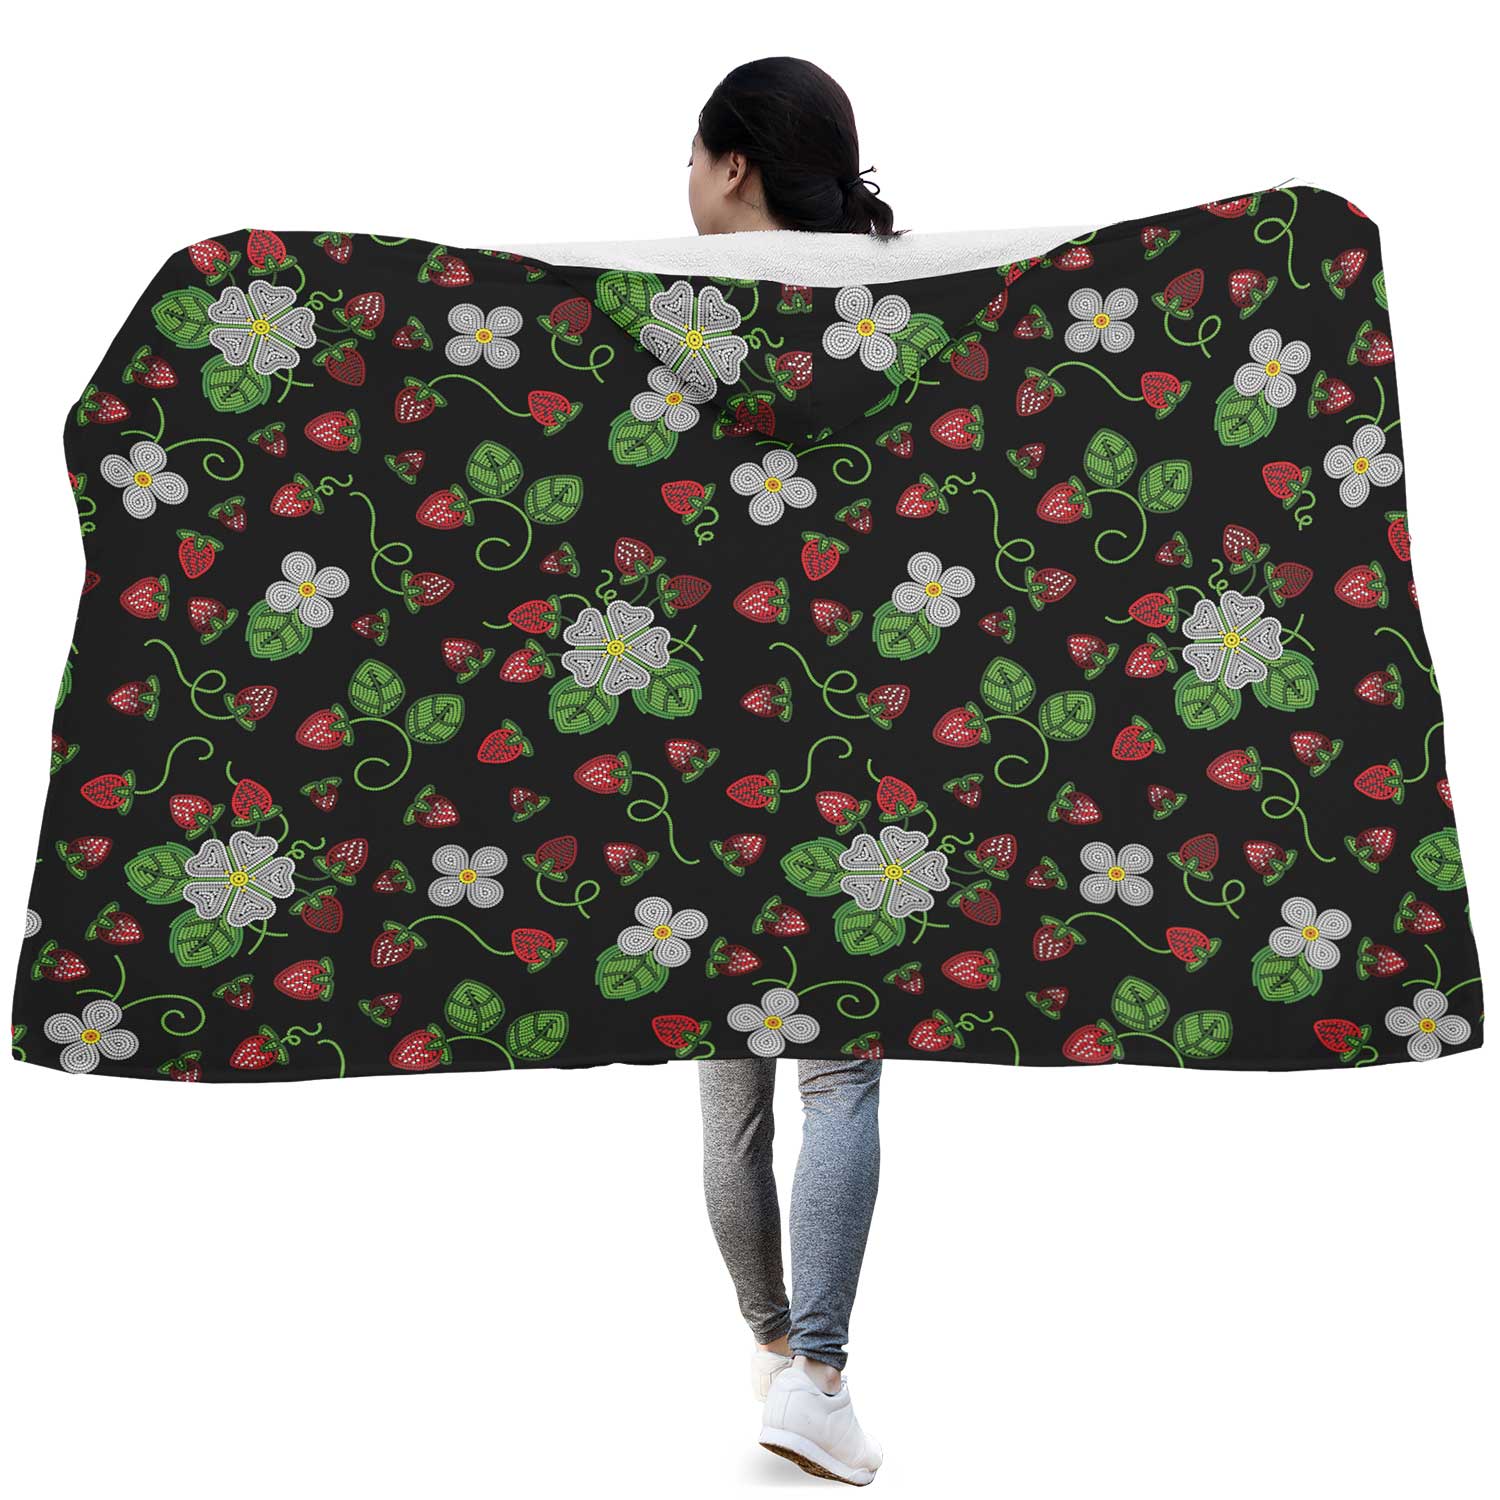 Strawberry Dreams Midnight Hooded Blanket